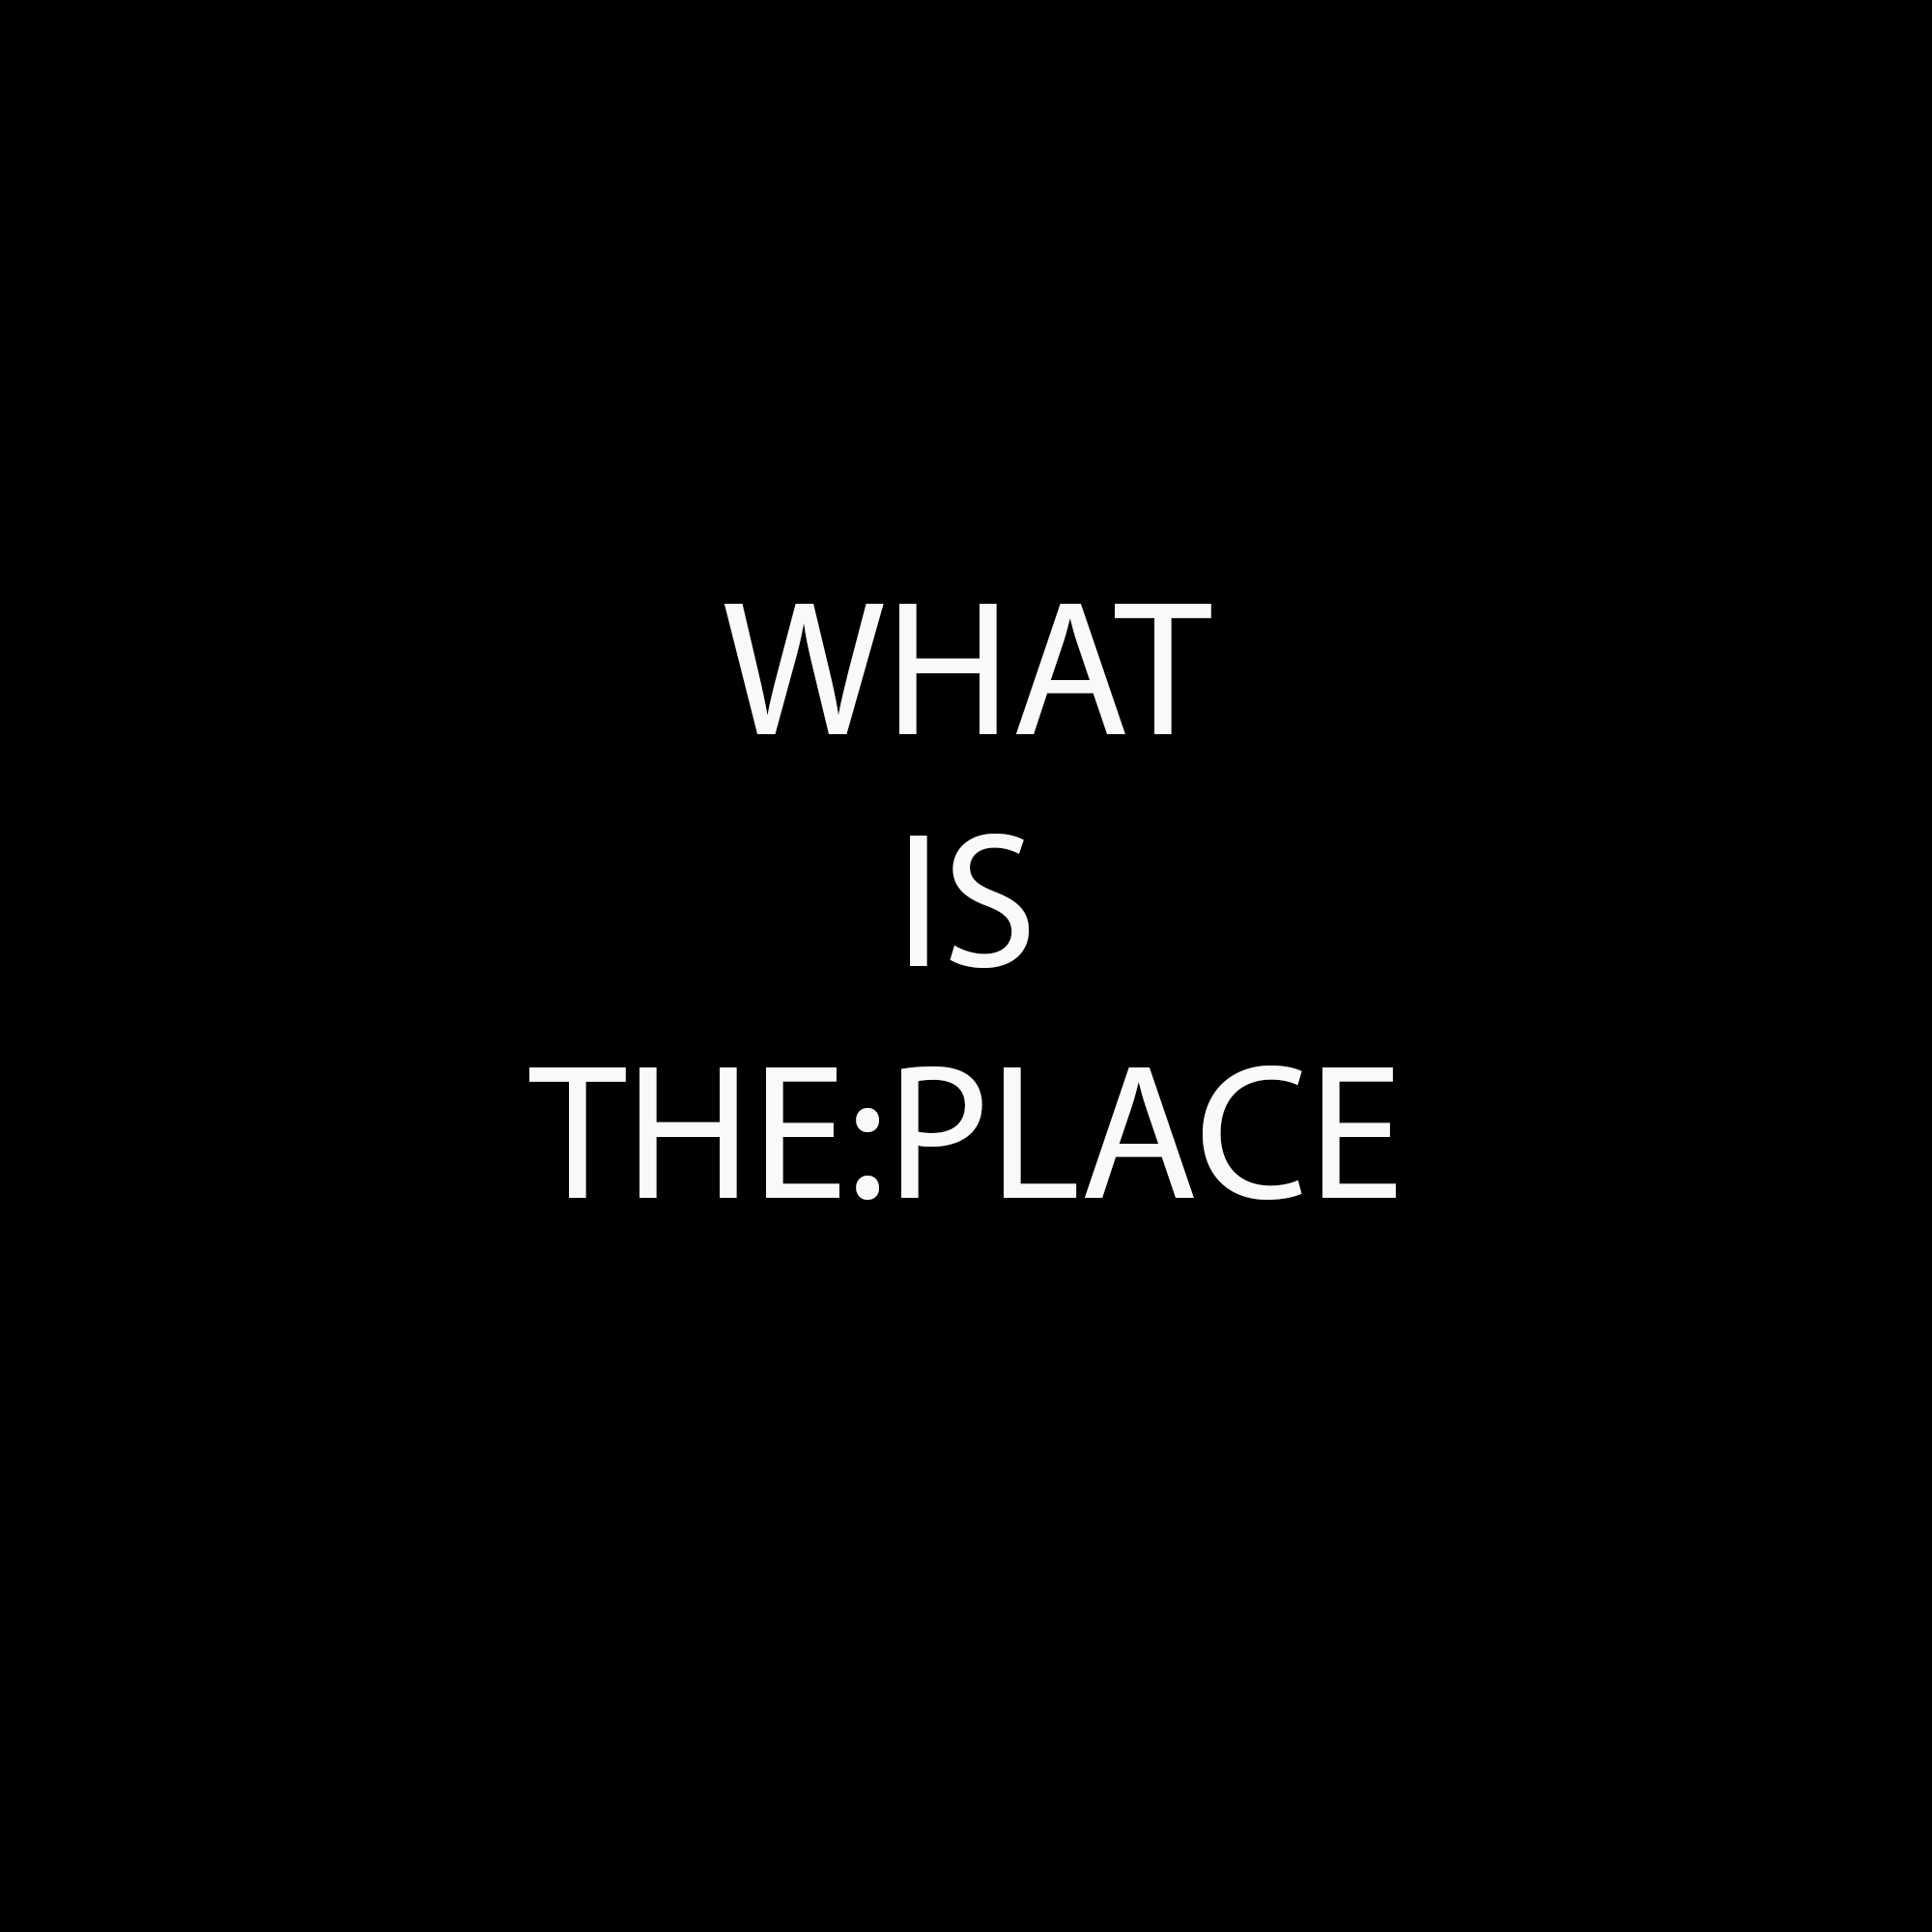 WHAT IS THE:PLACE